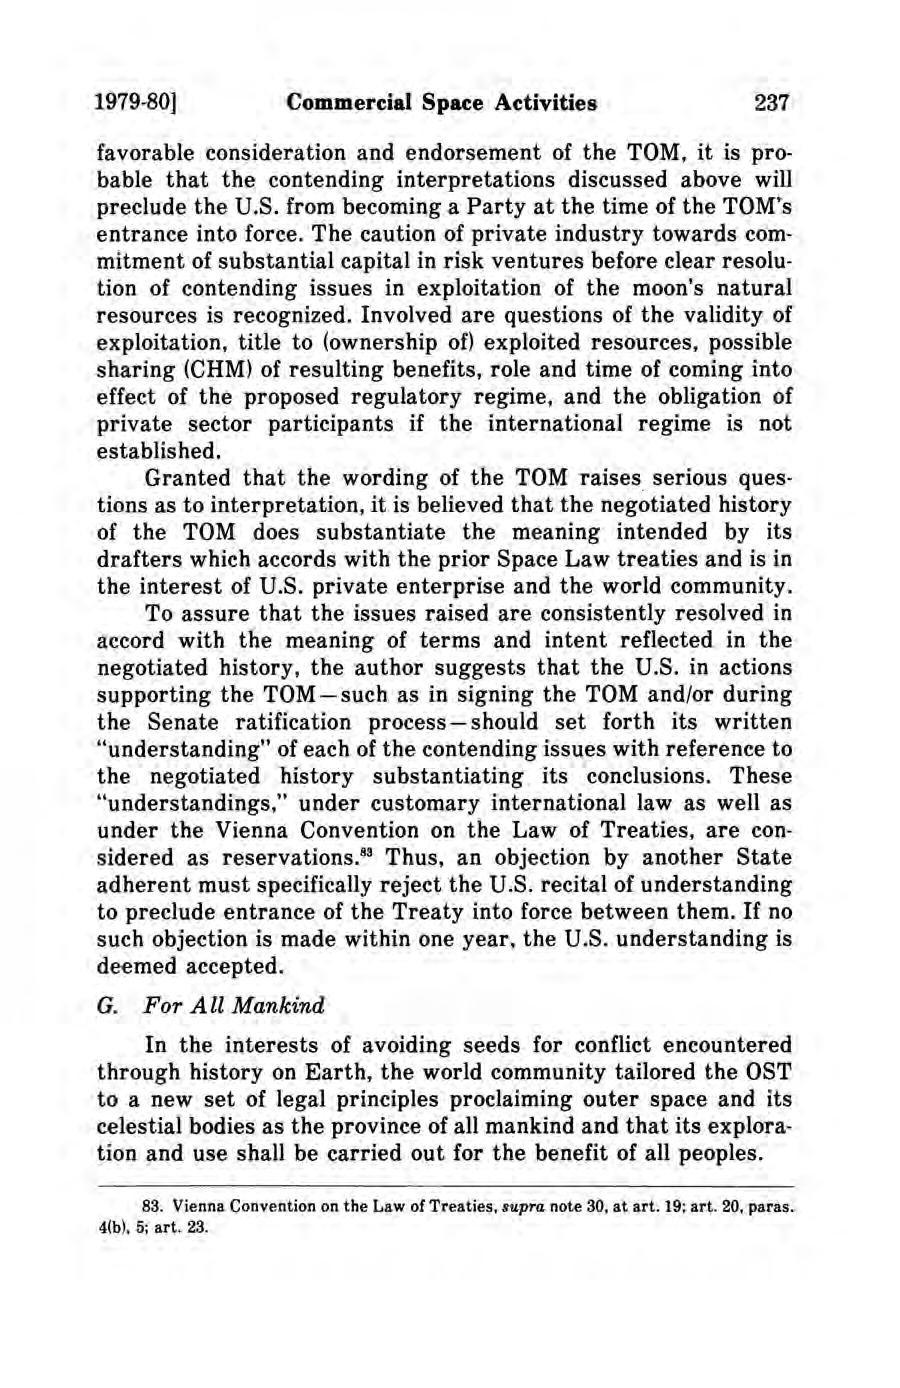 1979-80] Commercial Space Activities 237 favorable consideration and endorsement of the TOM, it is probable that the contending interpretations discussed above will preclude the U.S. from becoming a Party at the time of the TOM's entrance into force.